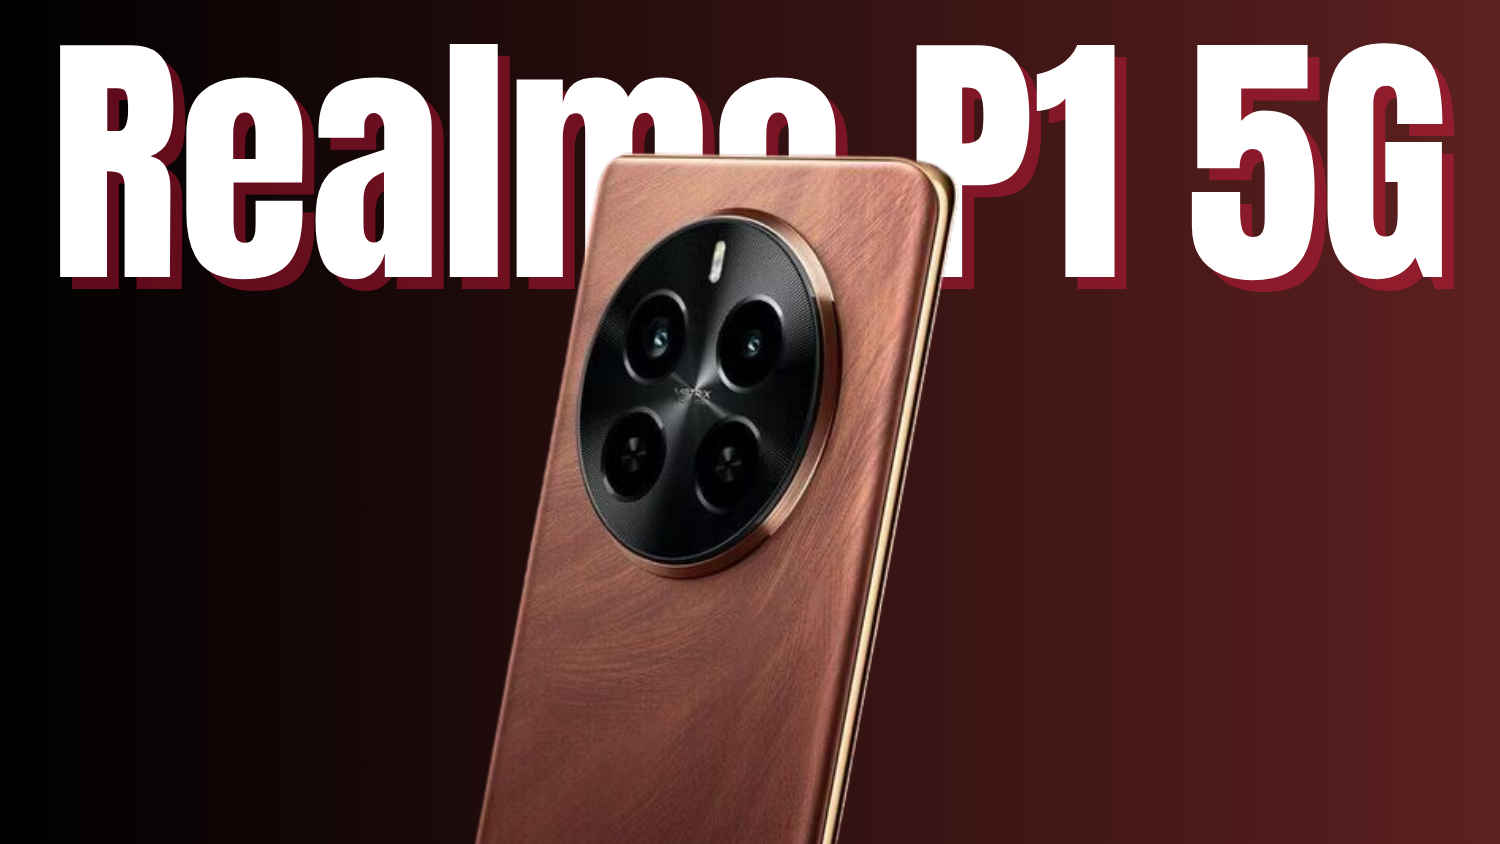 Realme P1 5G could be the best gaming phone under ₹15,000: Here’s why